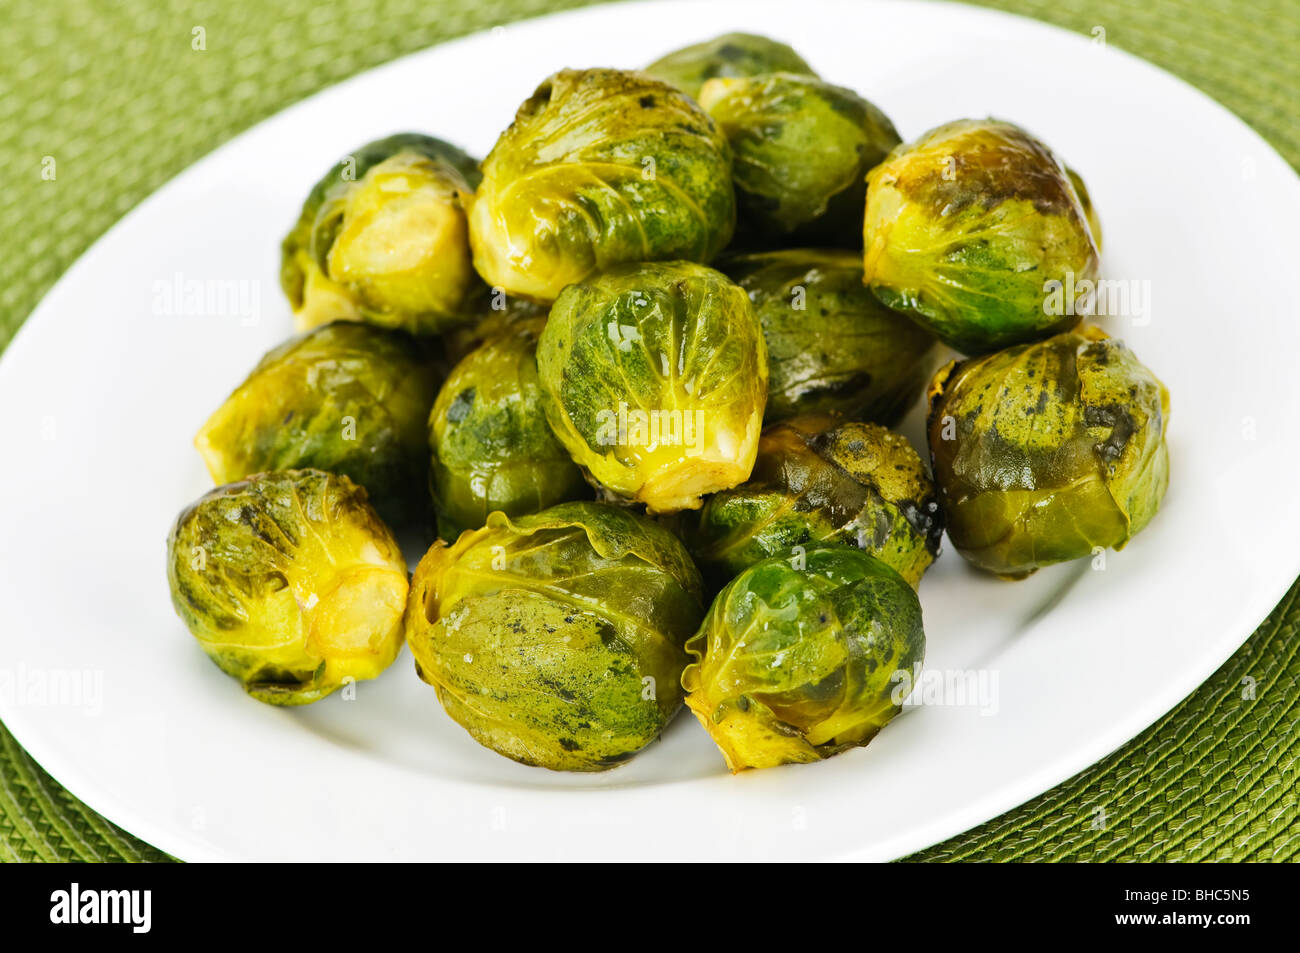 Plate of roasted green brussels sprouts on placemat Stock Photo